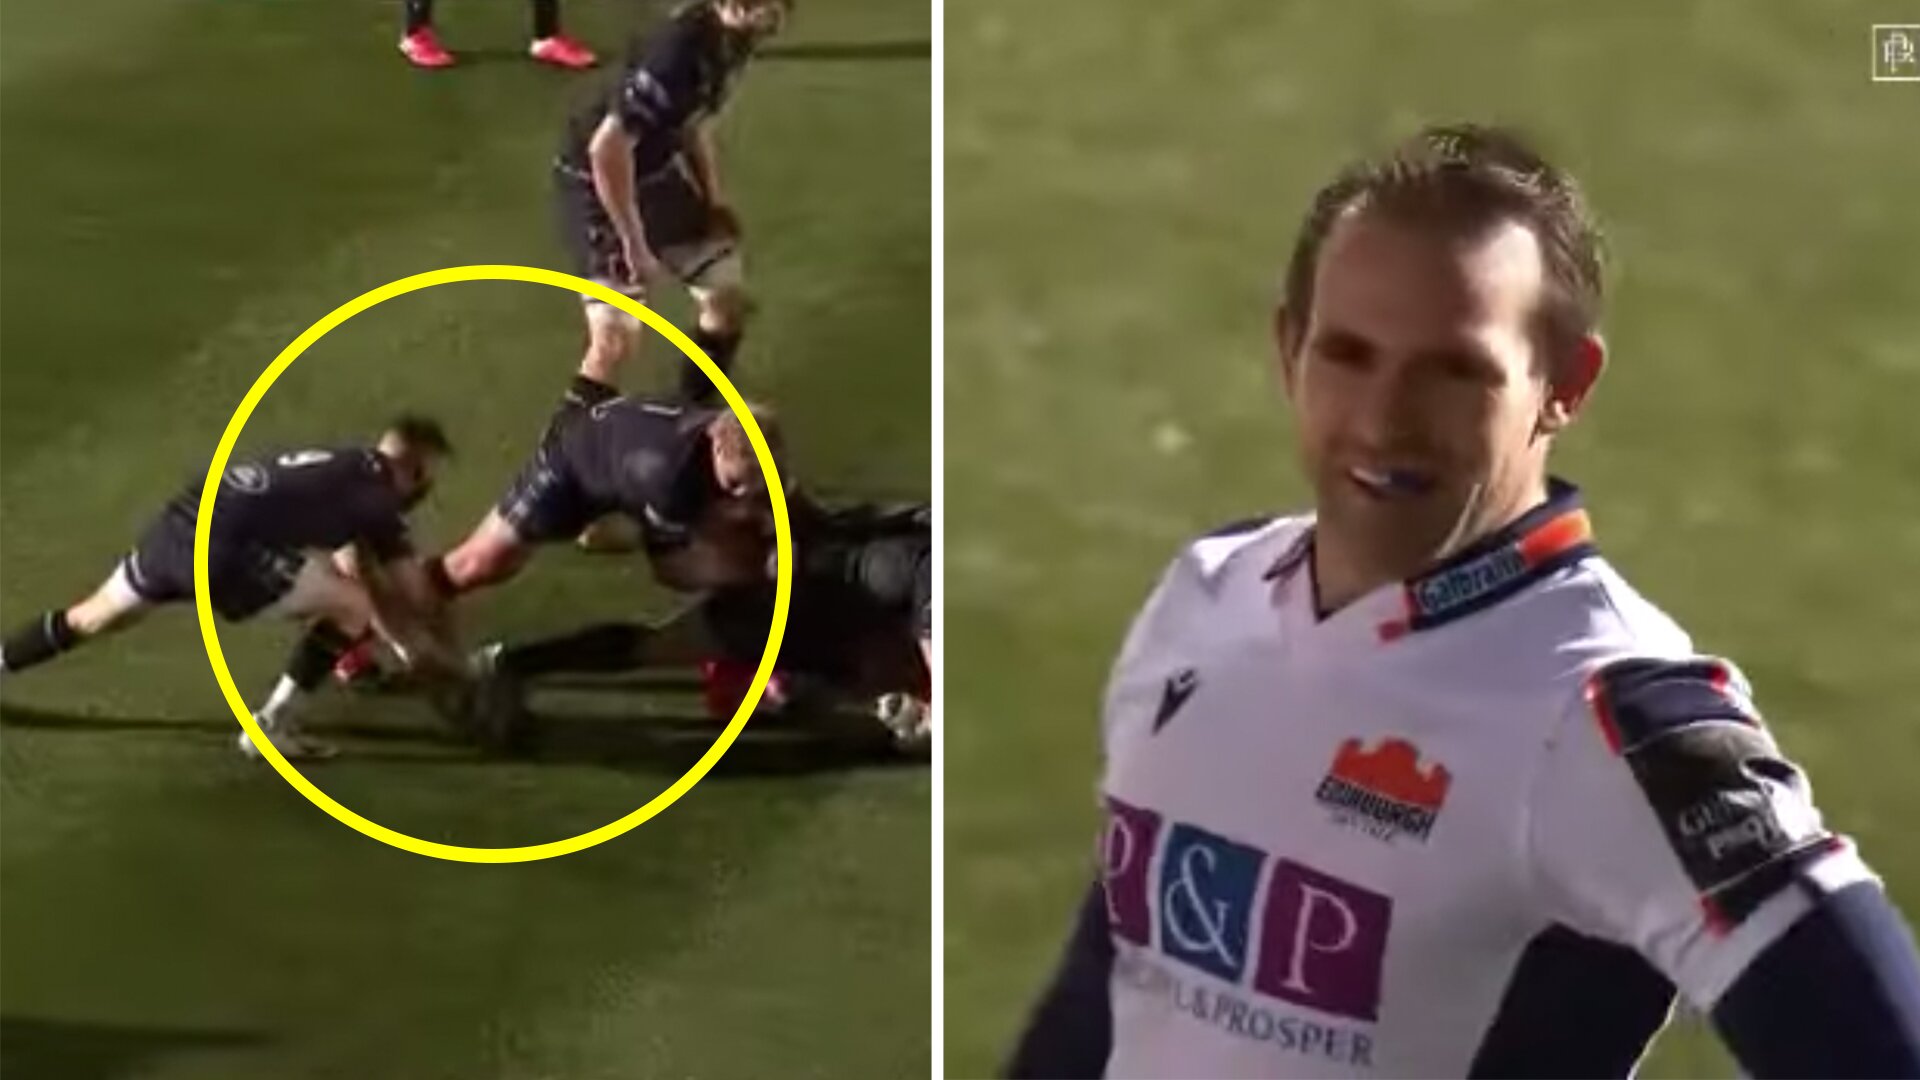 Farcial moment in rugby game as player mistakes train horn for final whistle